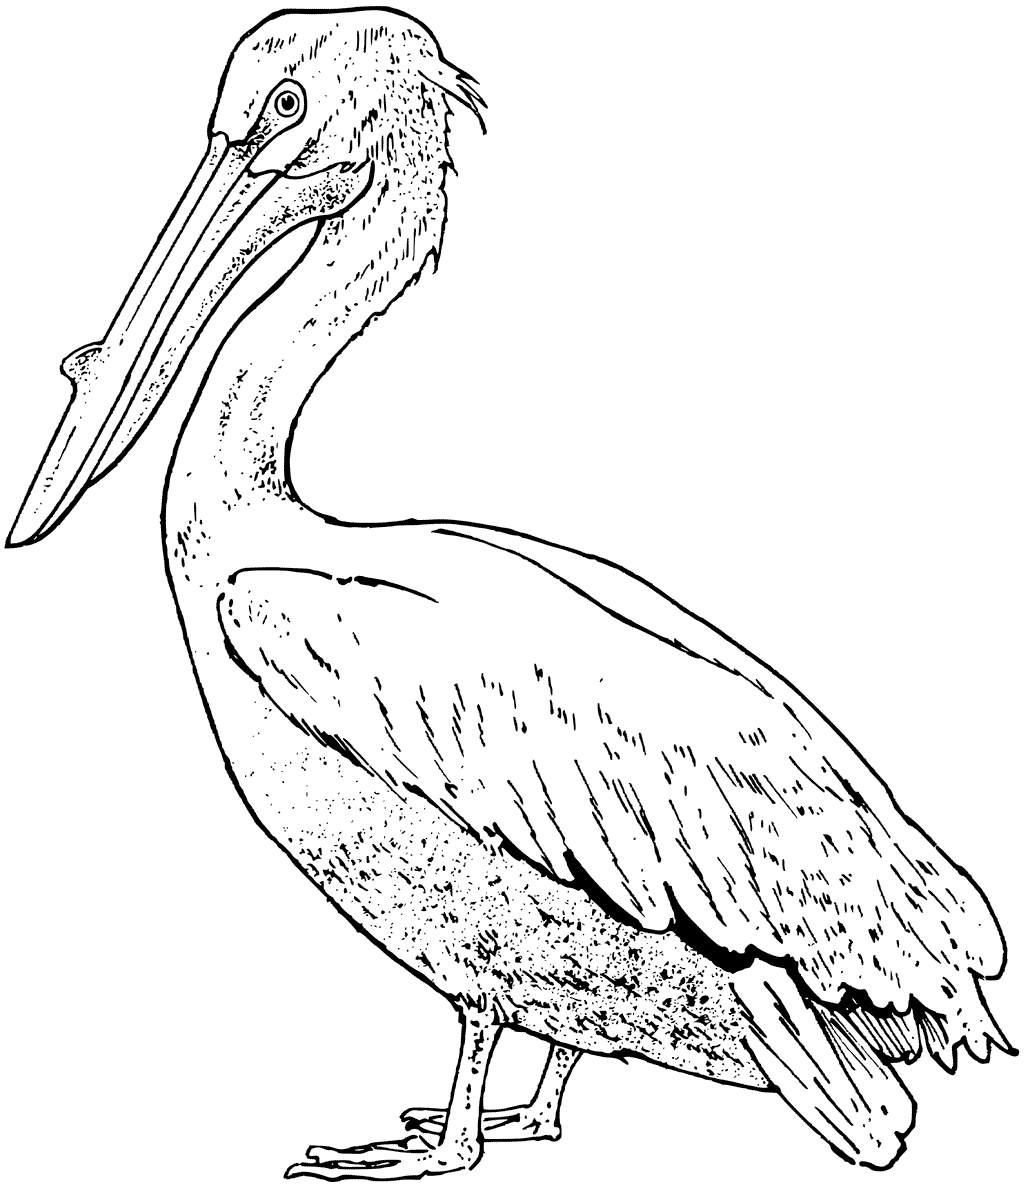 Brown Pelican Coloring Page - Get Coloring Pages